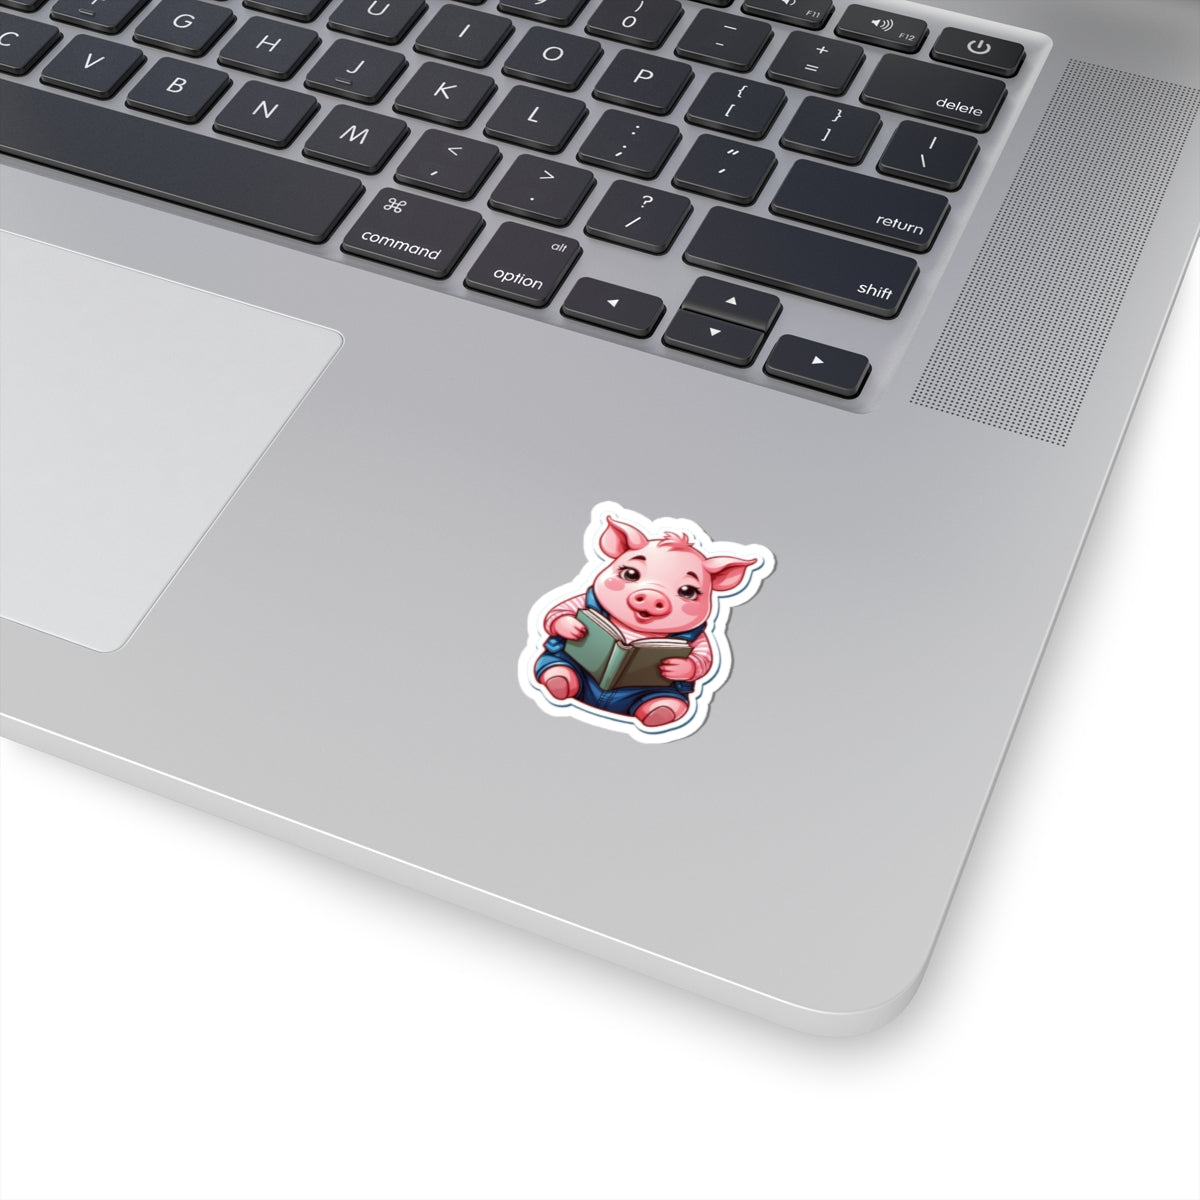 Little pig reading a book stickers